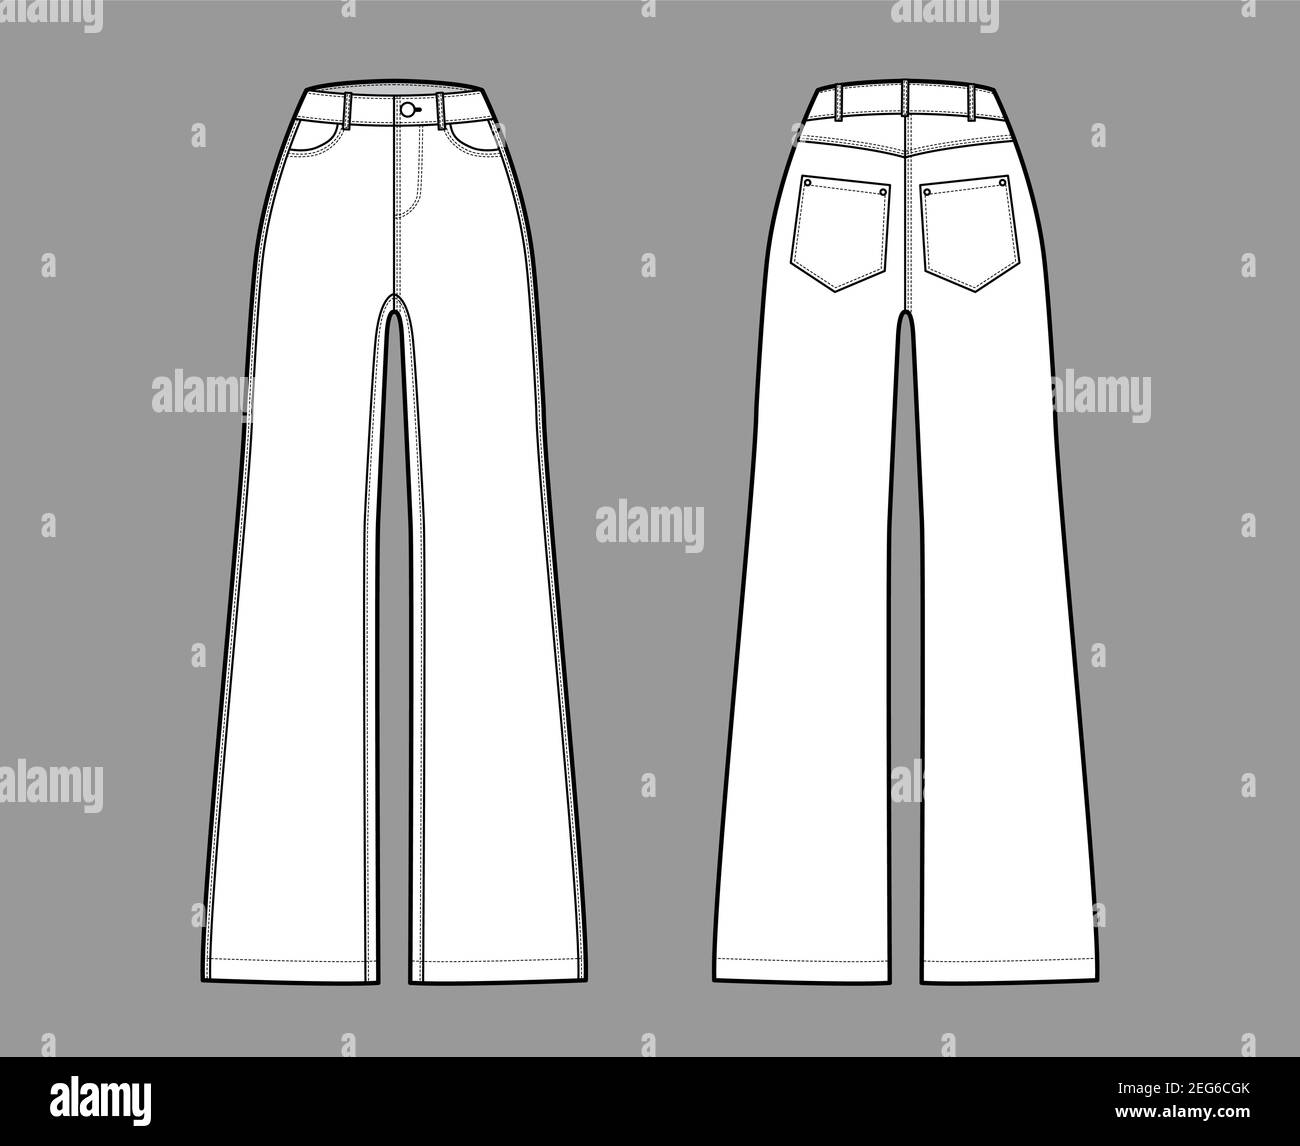 Jeans wide leg Denim pants technical fashion illustration with full length,  normal waist, rise, 5 pockets,